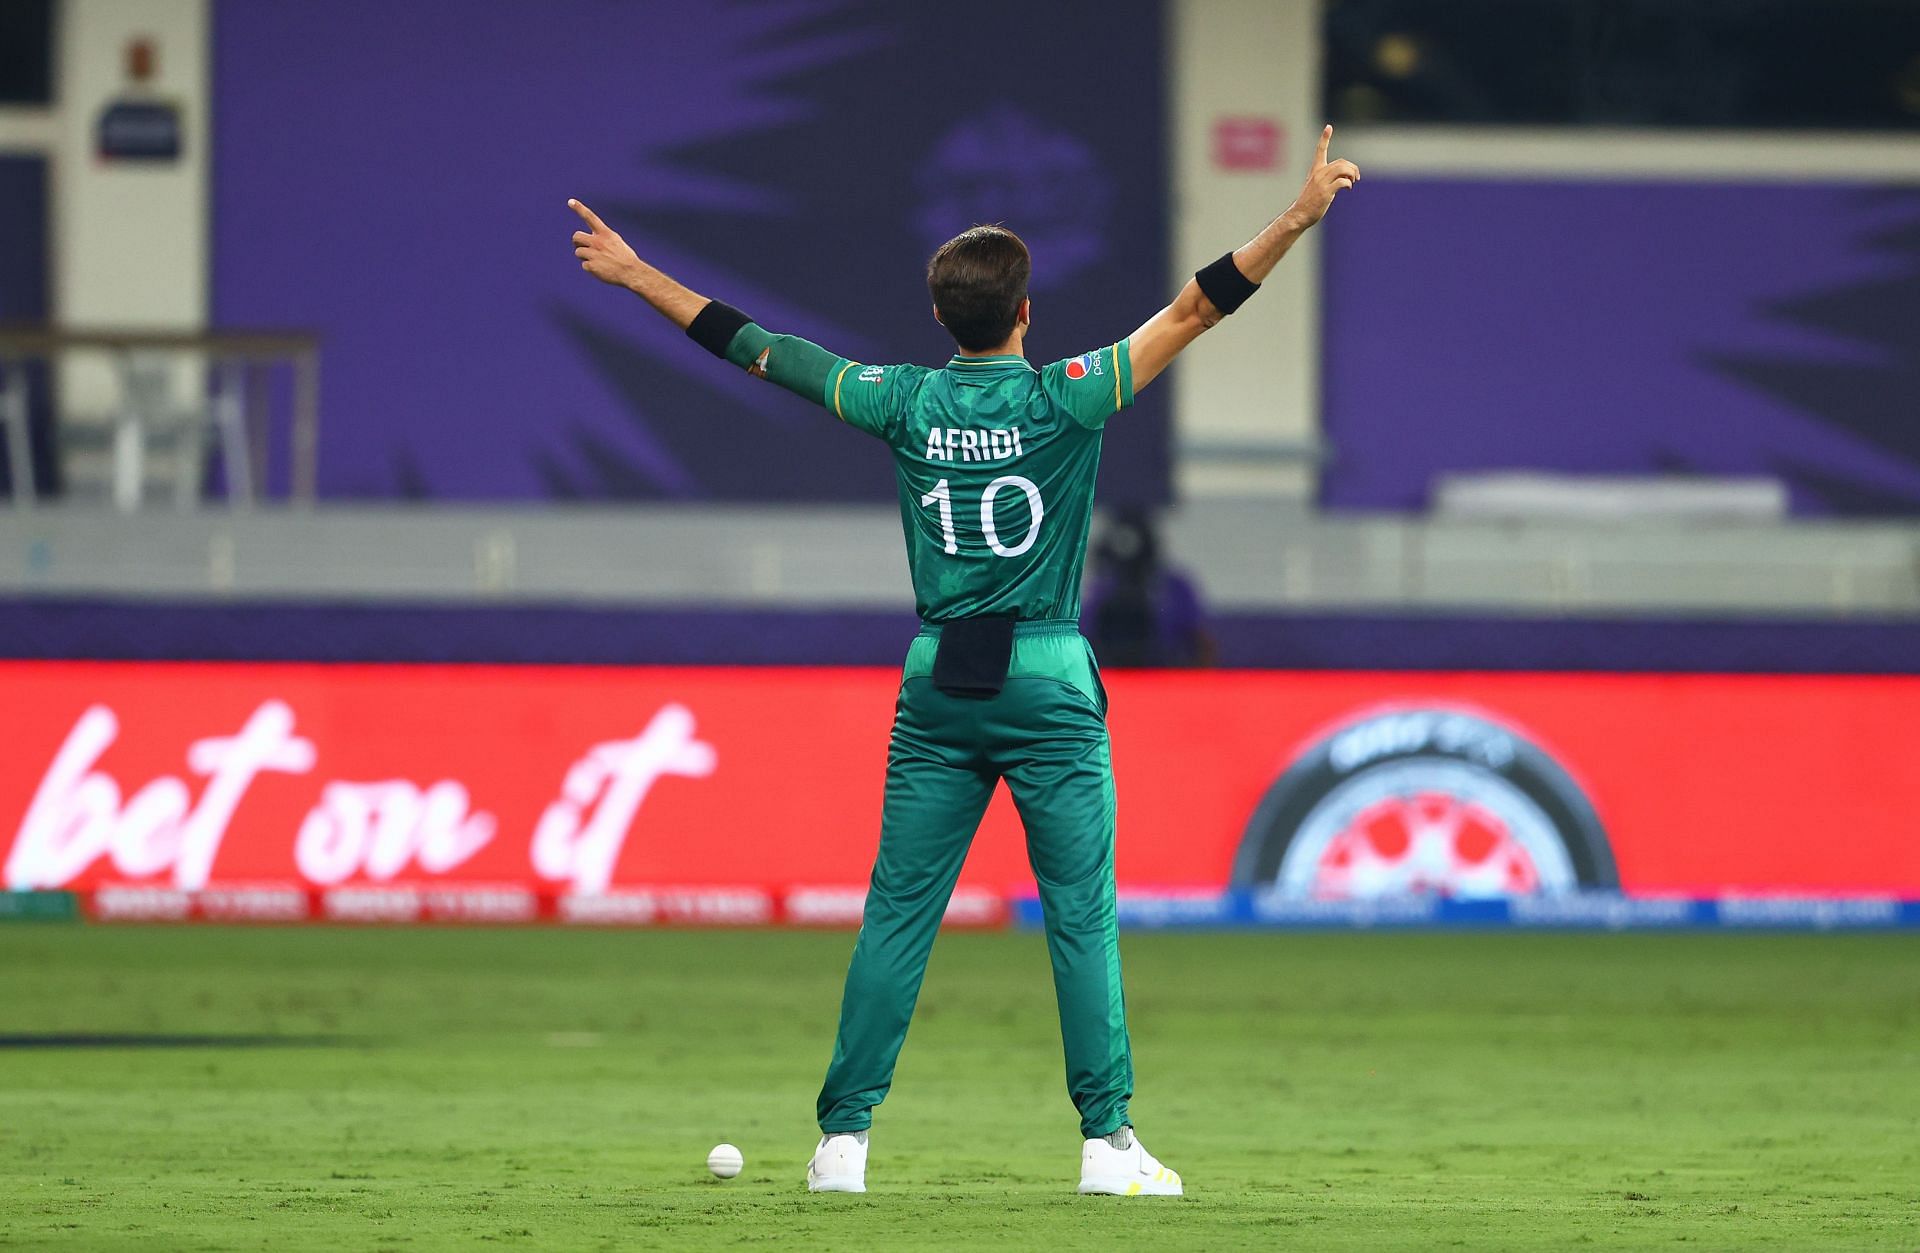 Shaheen Afridi celebrates the wicket of Rohit Sharma during the ICC T20 Cricket World Cup. Pic: Getty Images